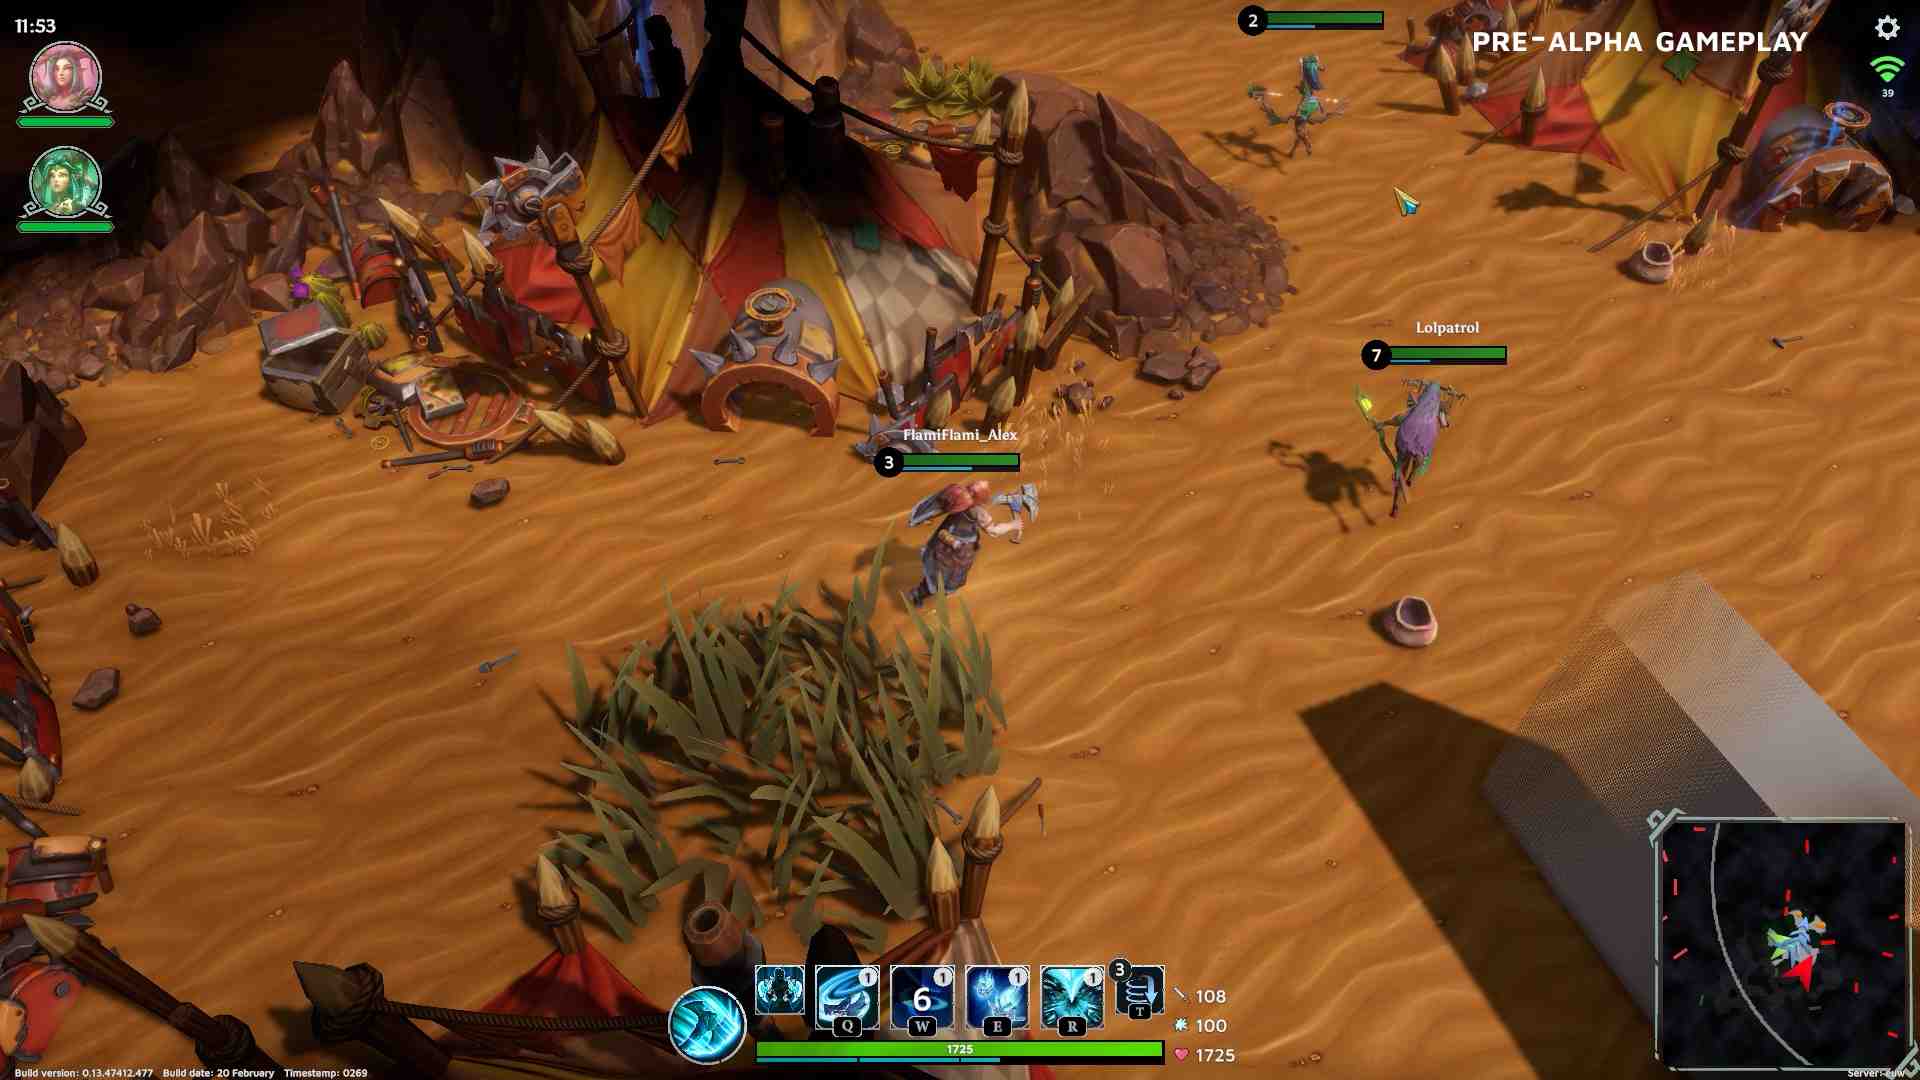 In game screenshot of two teams fighting in the desert.